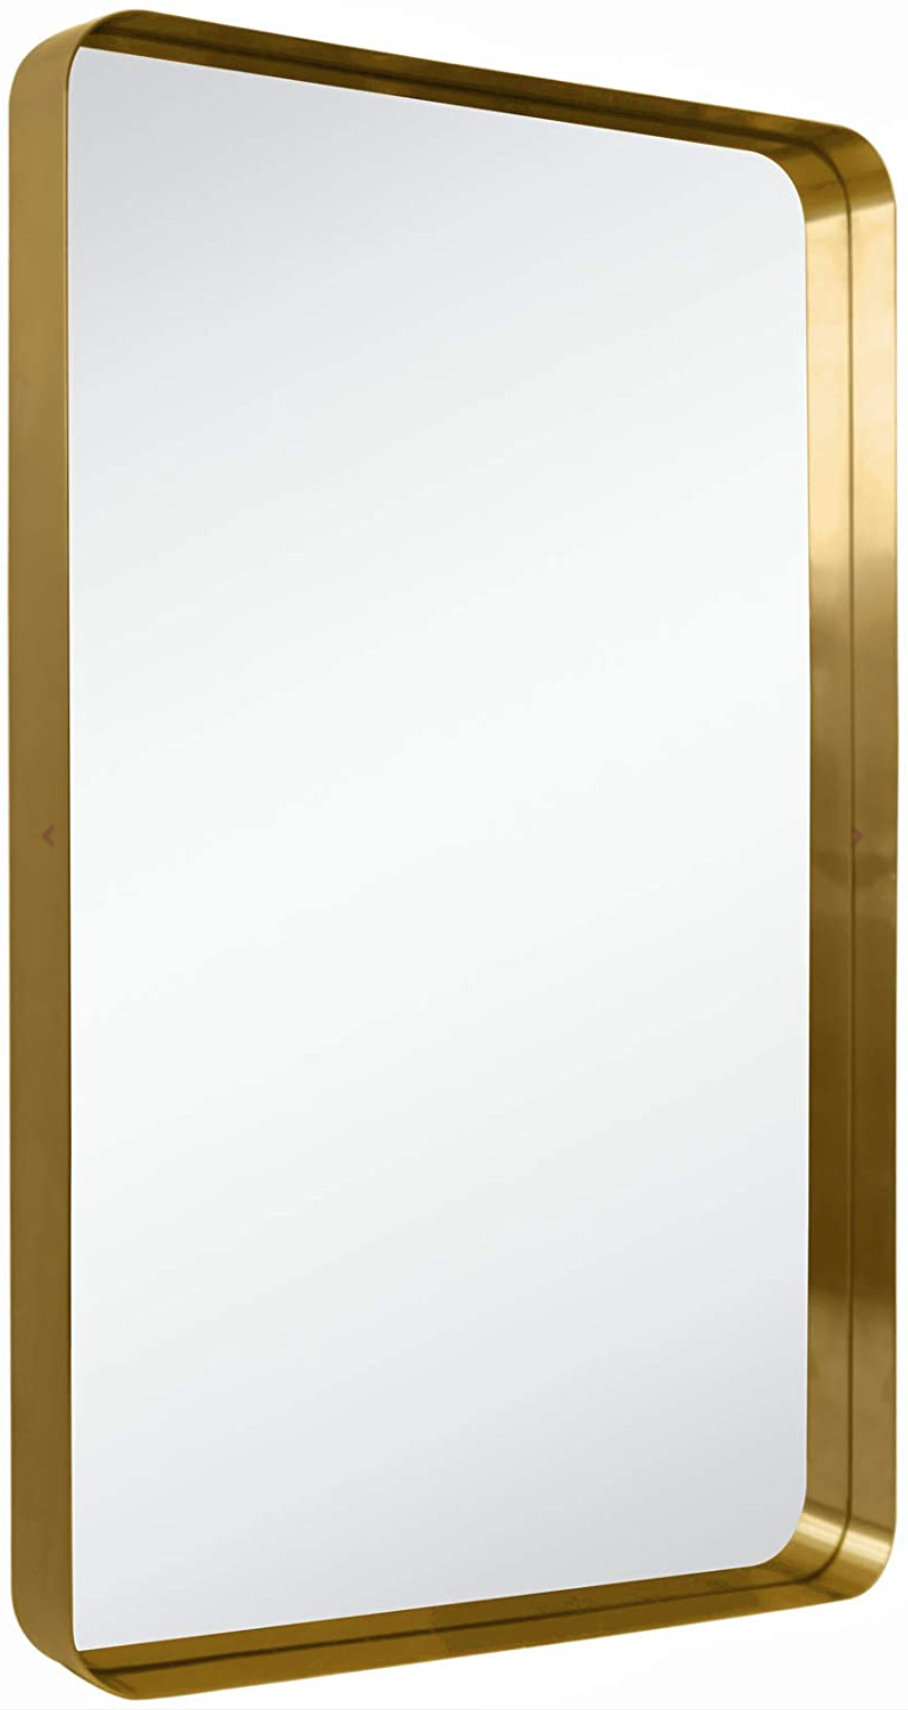 Rounded Rectangle Mirrors